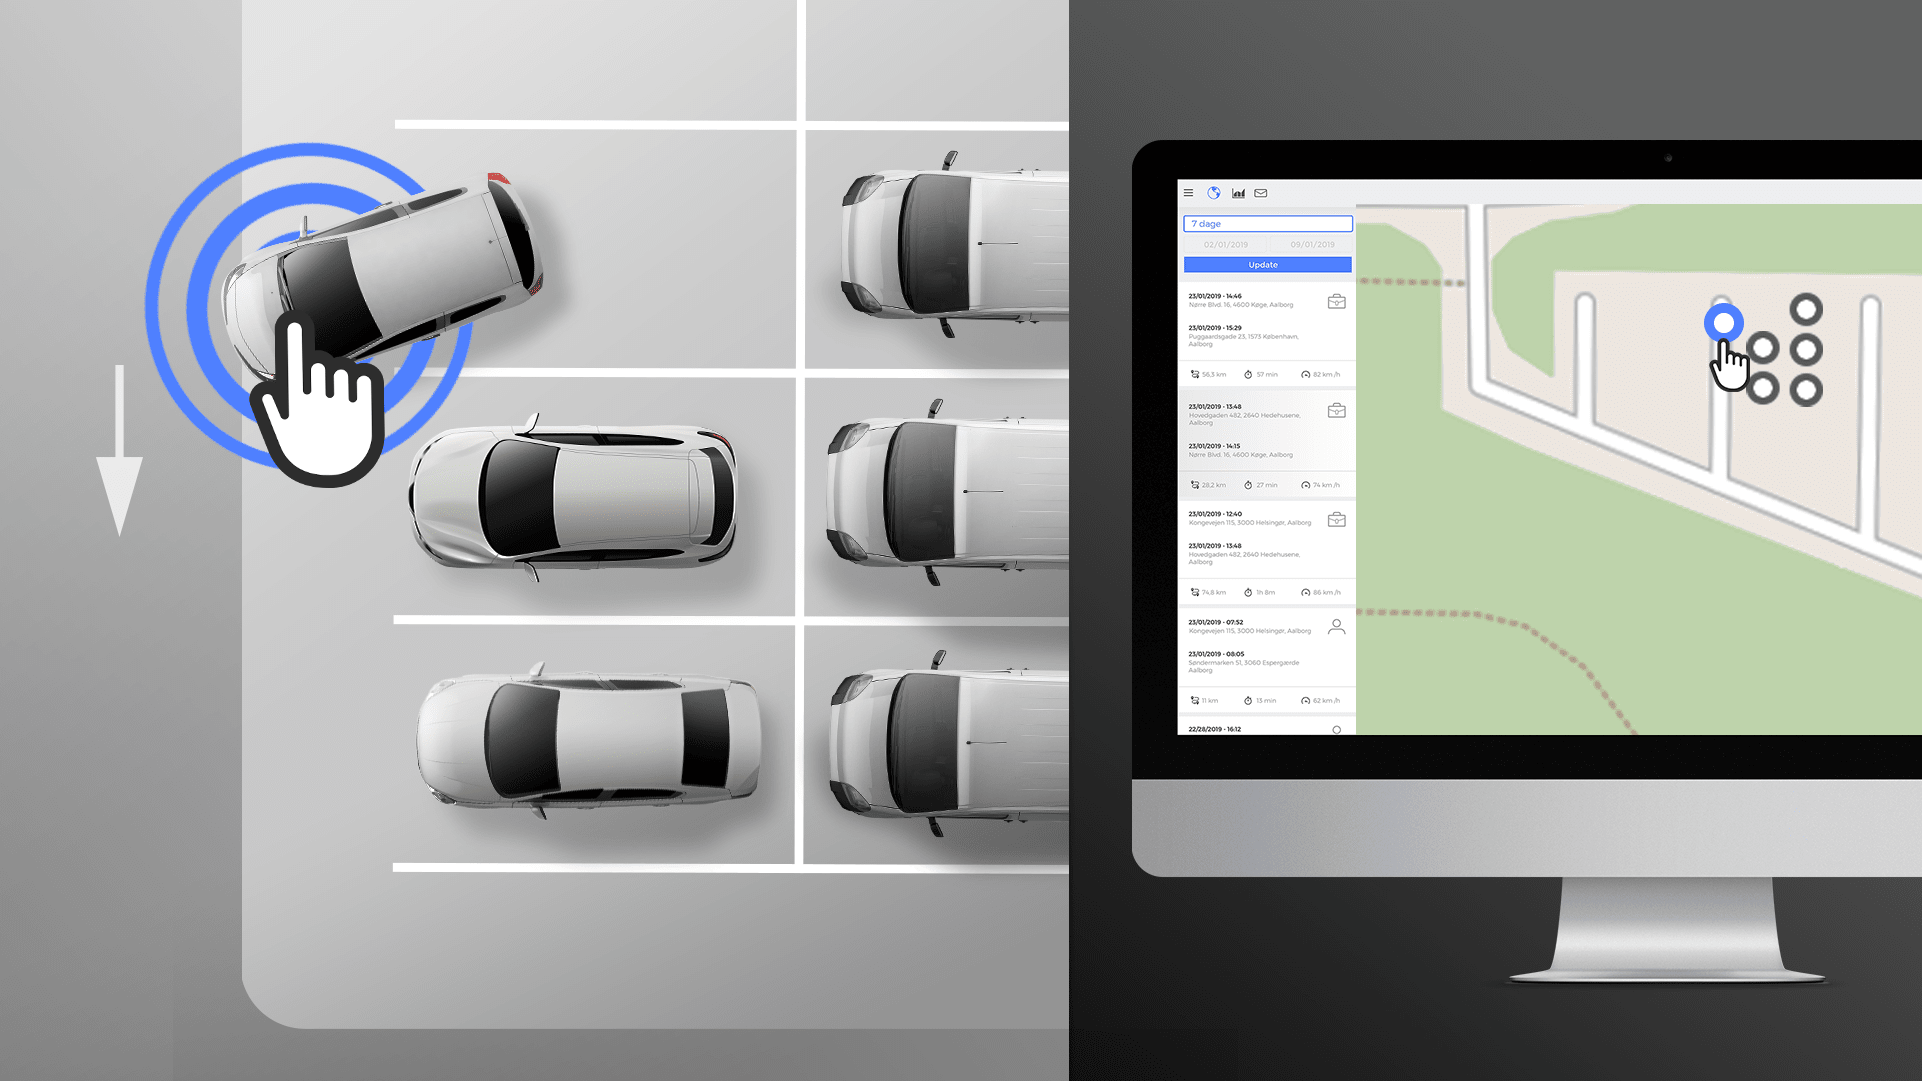 Manage all fleet-related operations on a connected car platform